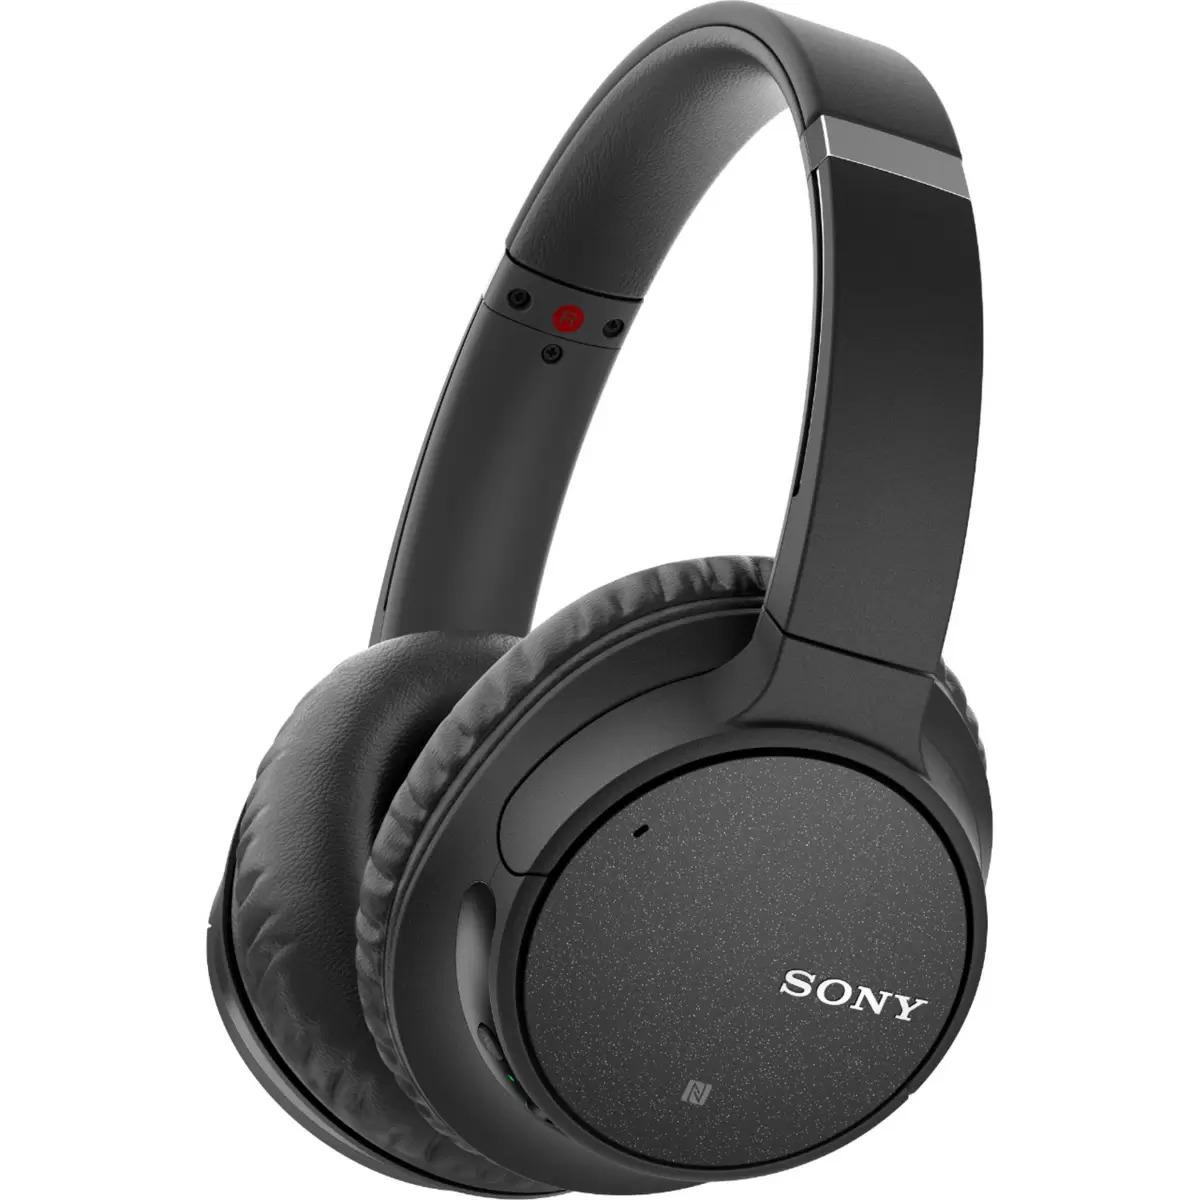 Sony WH-CH700N Wireless Noise Canceling Headphones for $68 Shipped